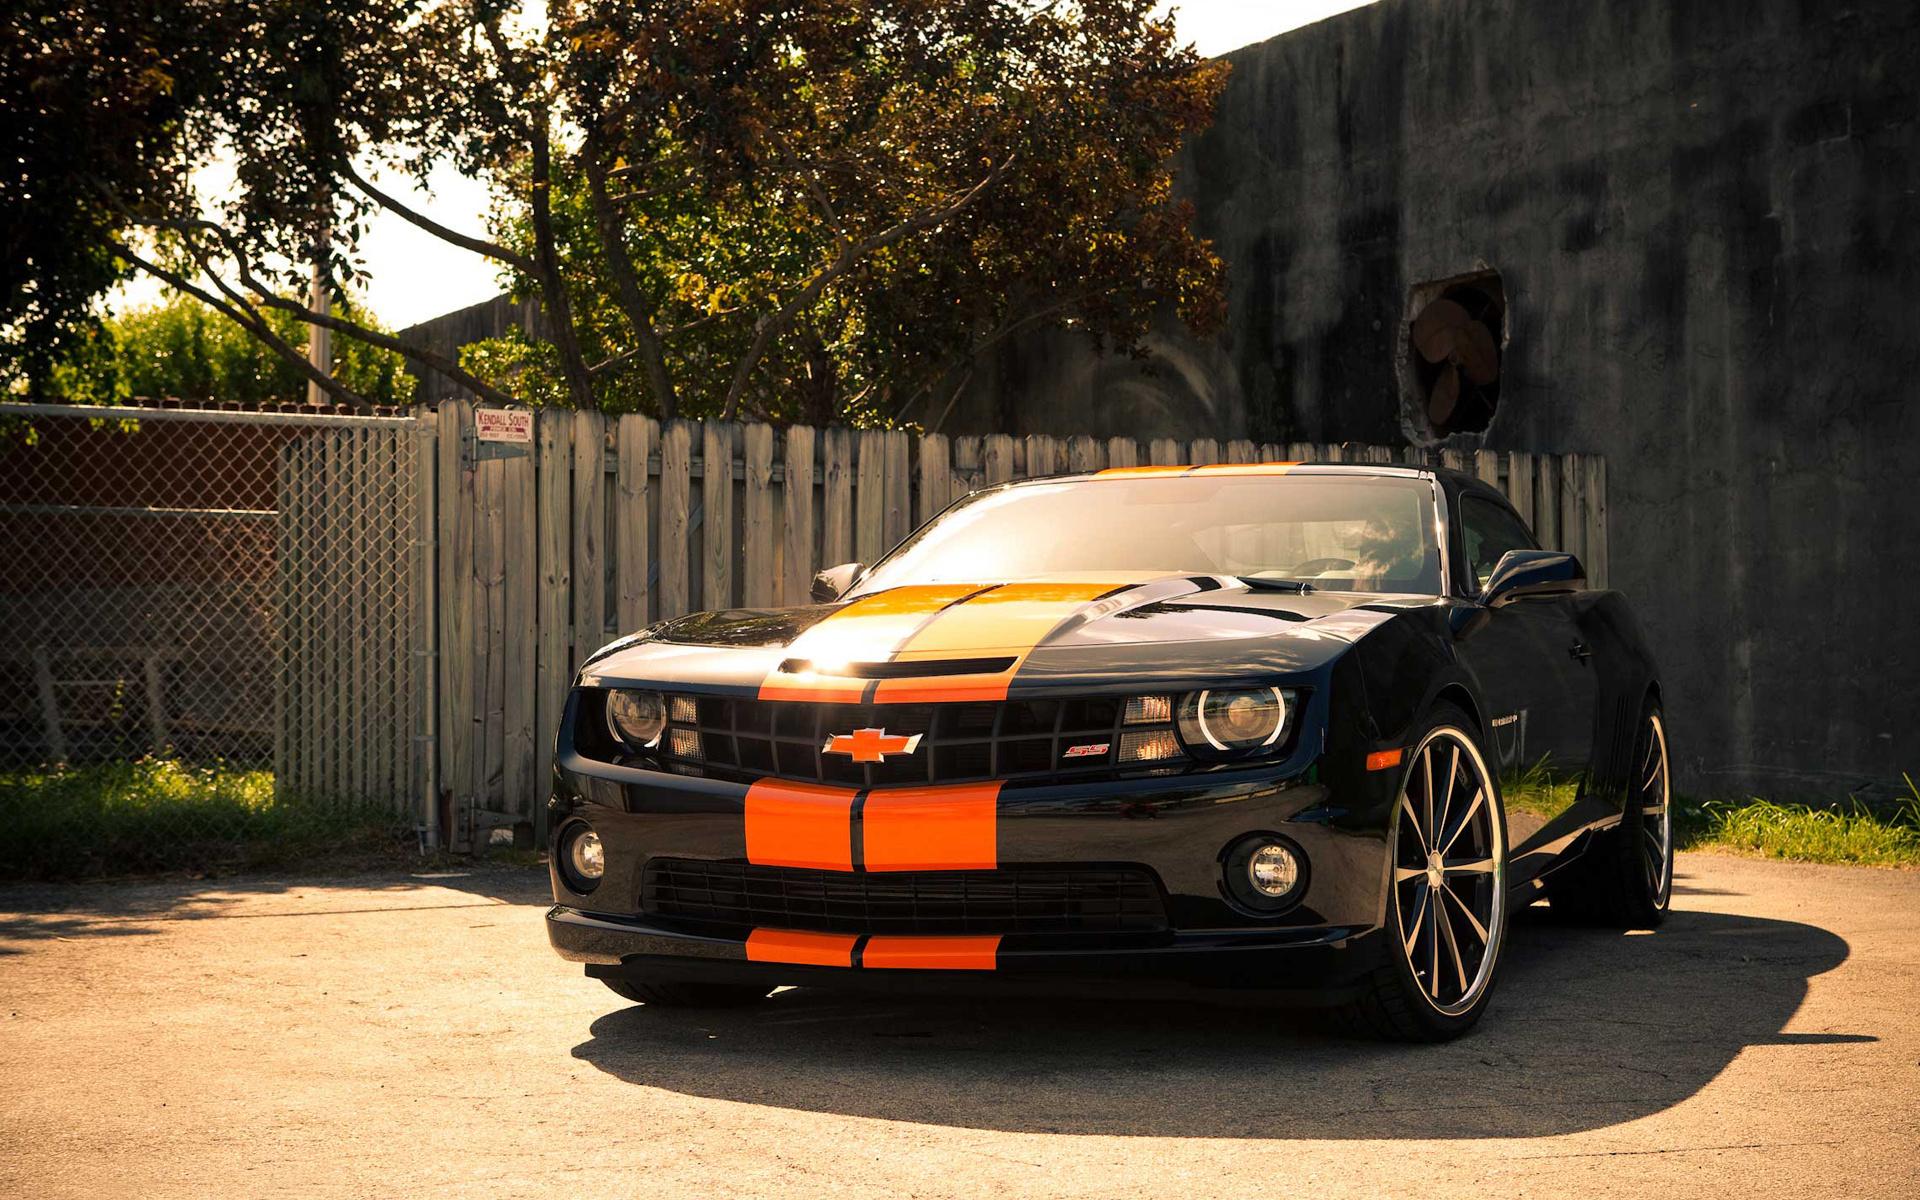 Download Chevrolet camaro ss car   Cars wallpapers for your mobile